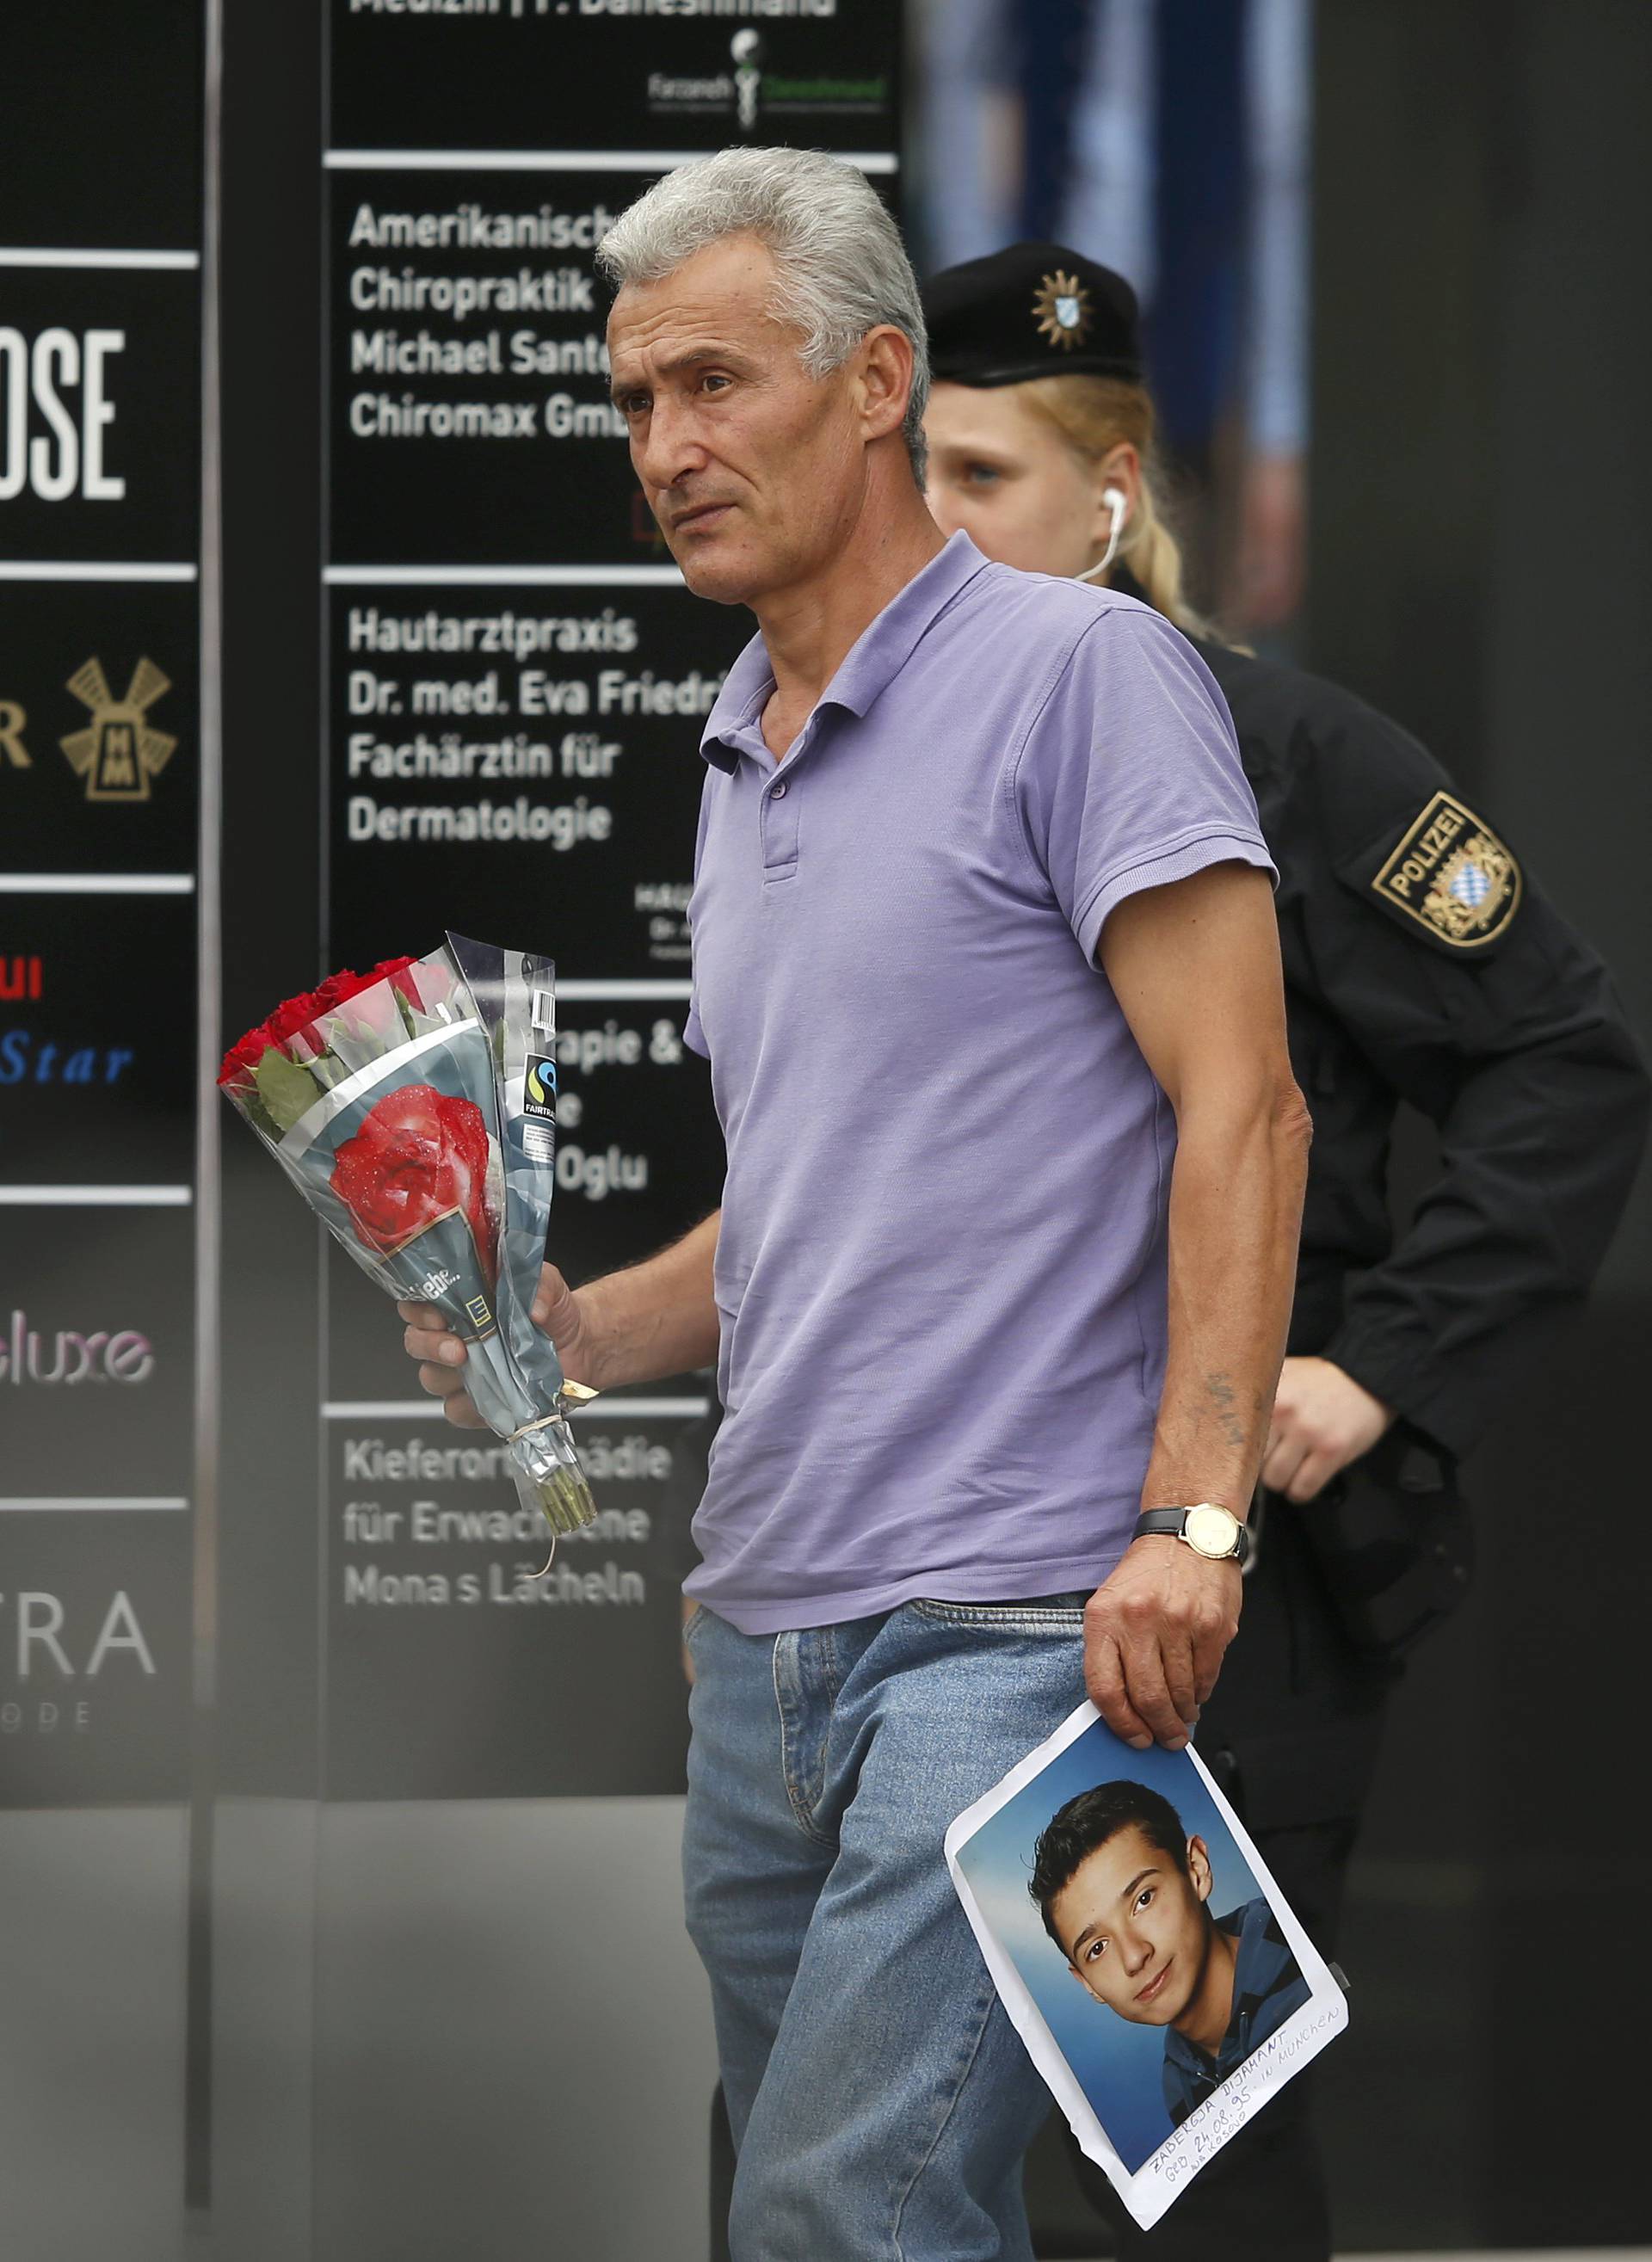 Man holding photo he claims is his slain son approaches police cordon near Olympia shopping mall in Munich